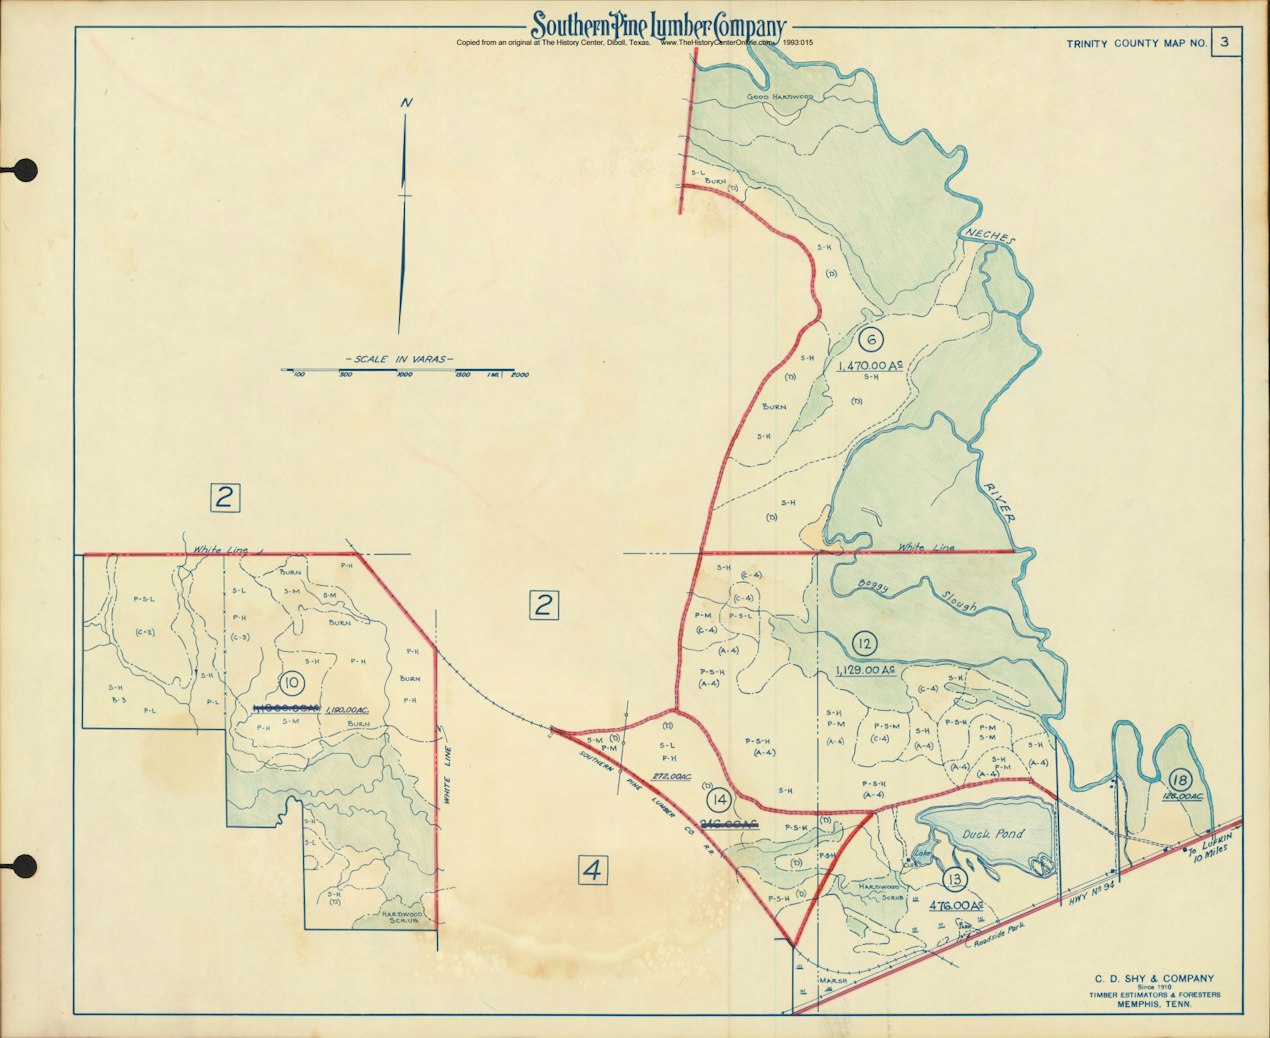 058 1955 Trinity County Timberlands Map 03